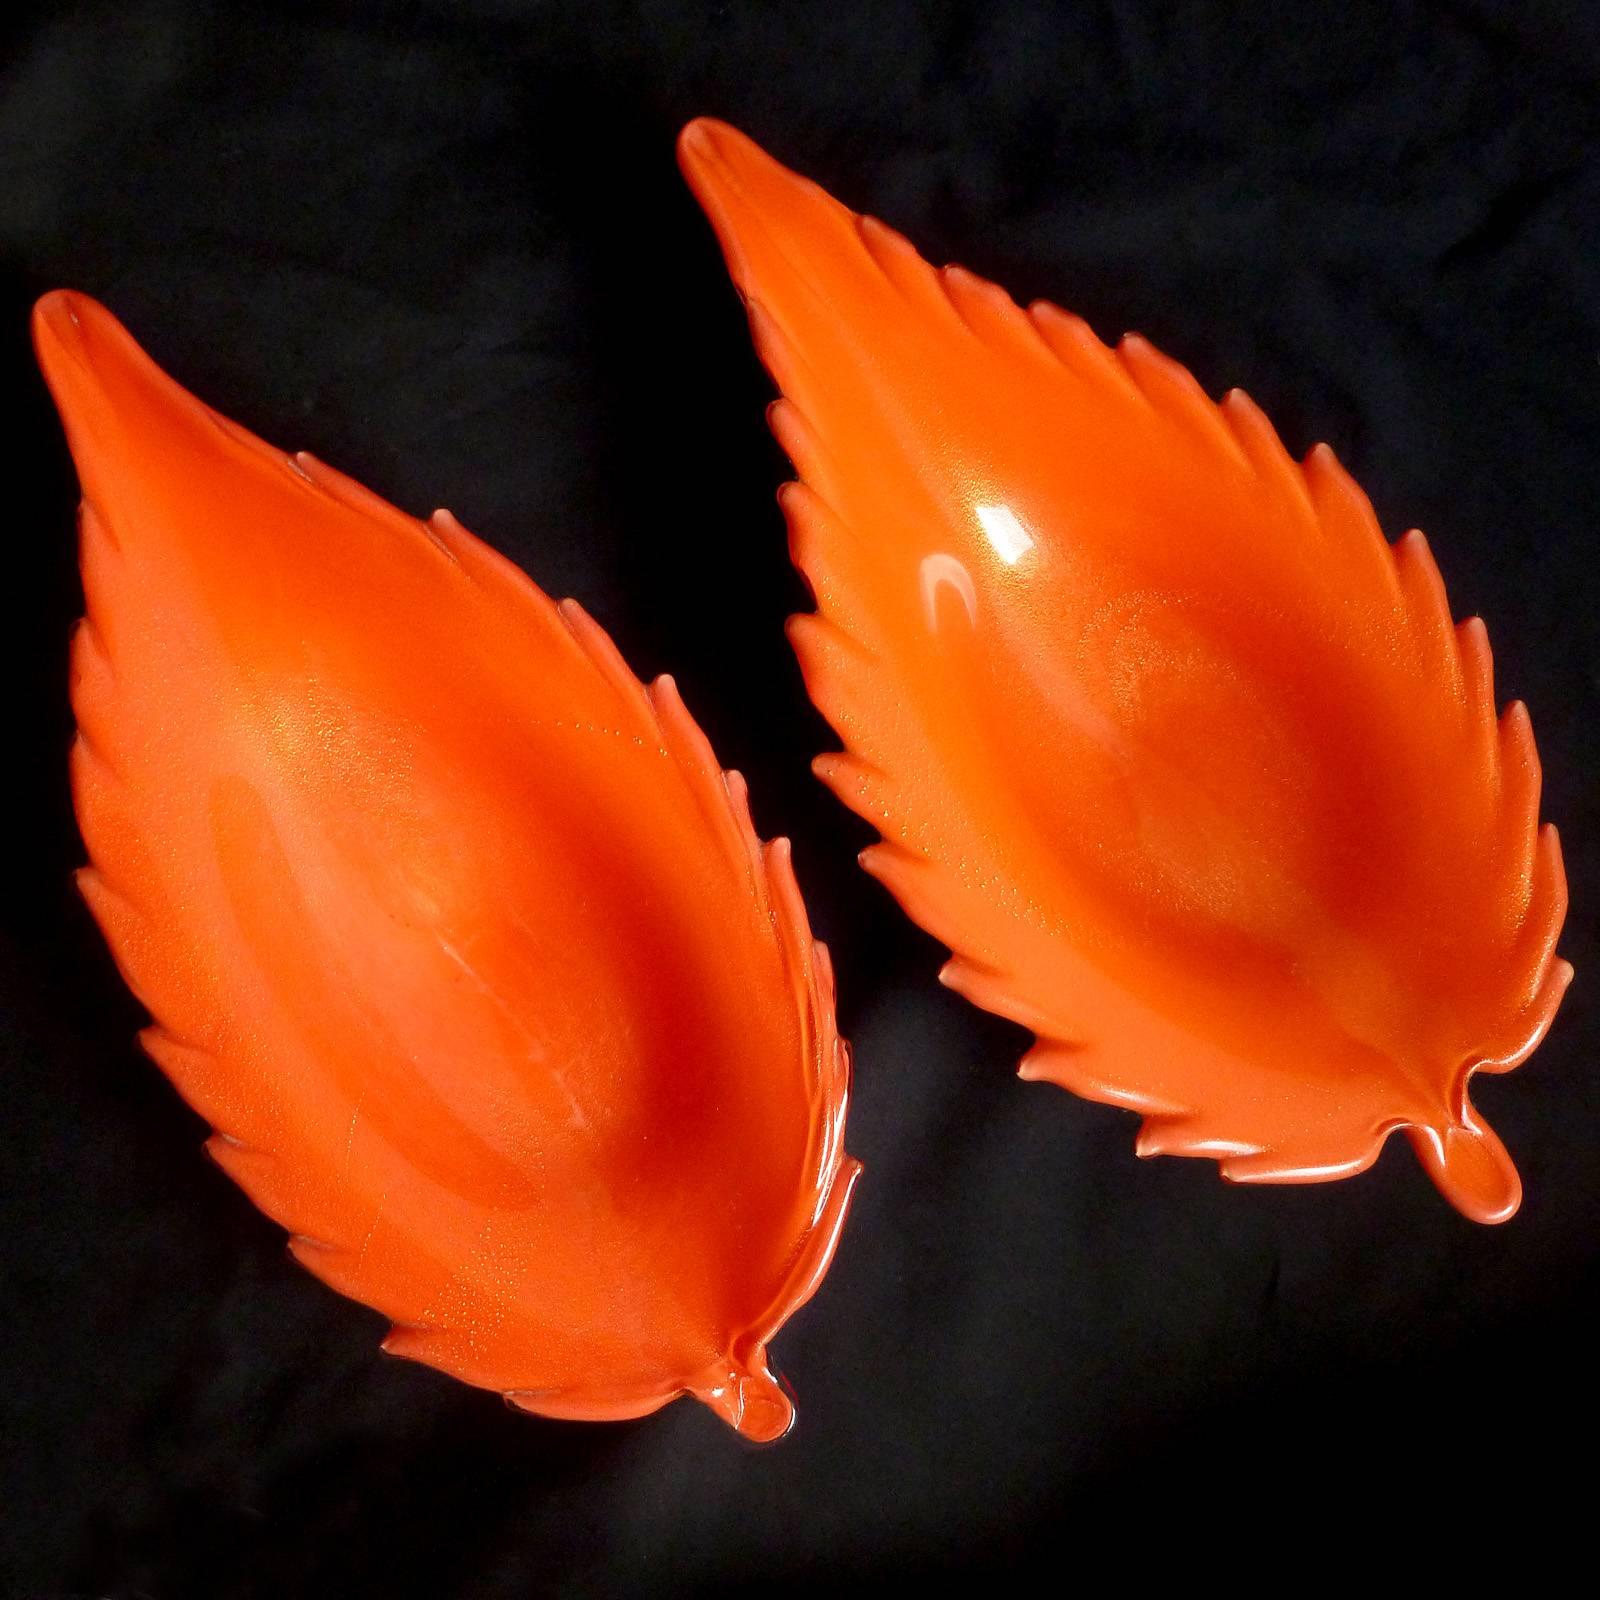 Price is per item - Gorgeous Murano hand blown feather or leaf shaped Italian art glass decorative serving bowls. Documented to designer Alfredo Barbini, circa 1950s-1960s. The 1st bowl has a striped design in copper aventurine along with gold.